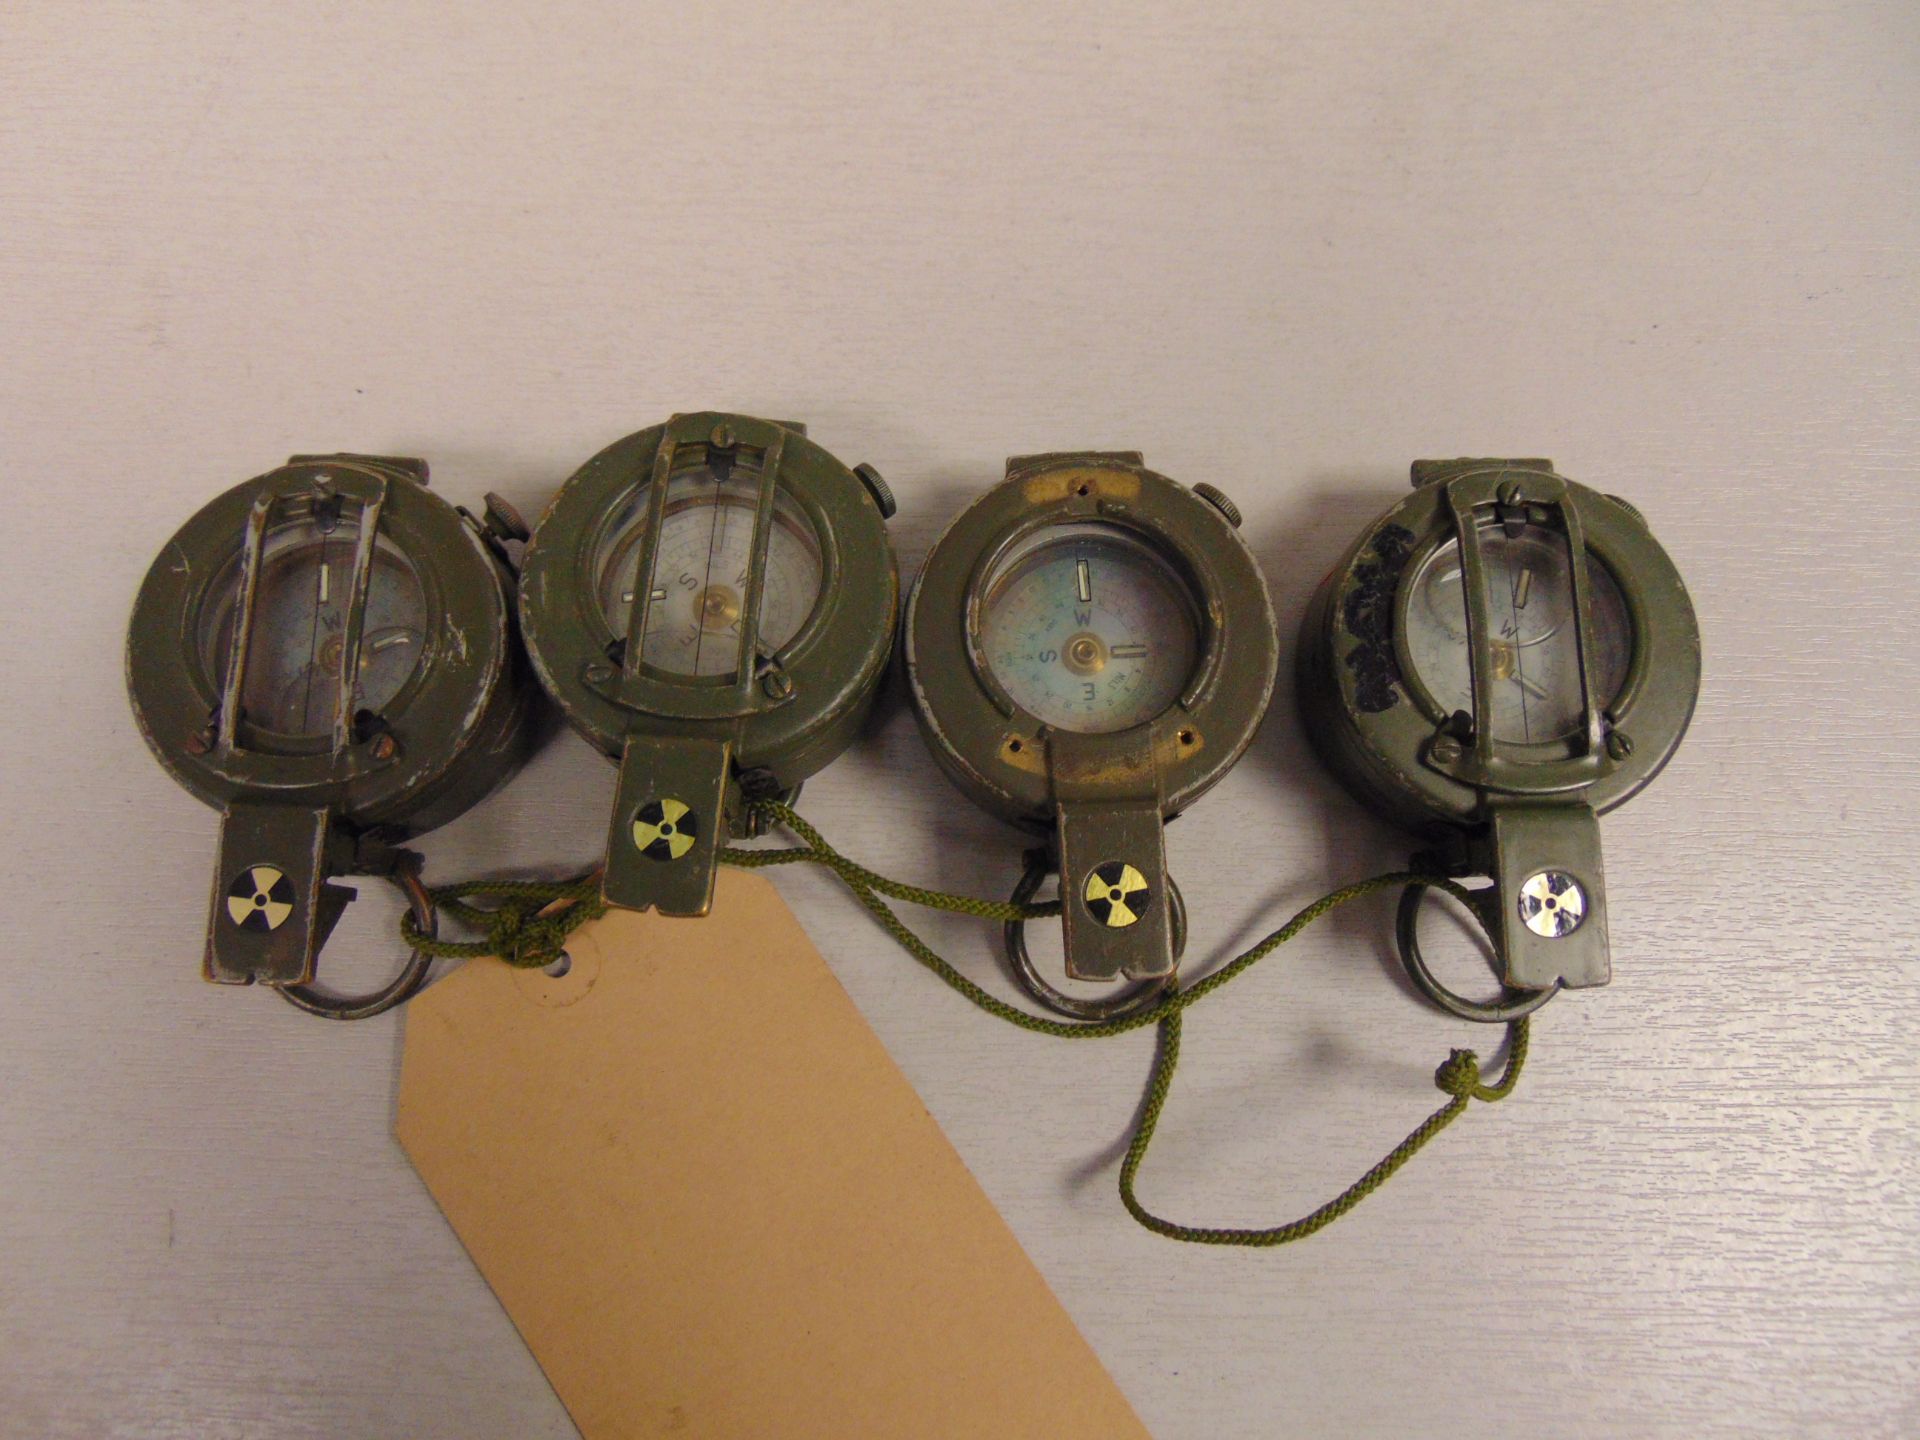 4 x Stanley London British Army Brass Prismatic Compass in Mils, Nato Marked - Image 2 of 4